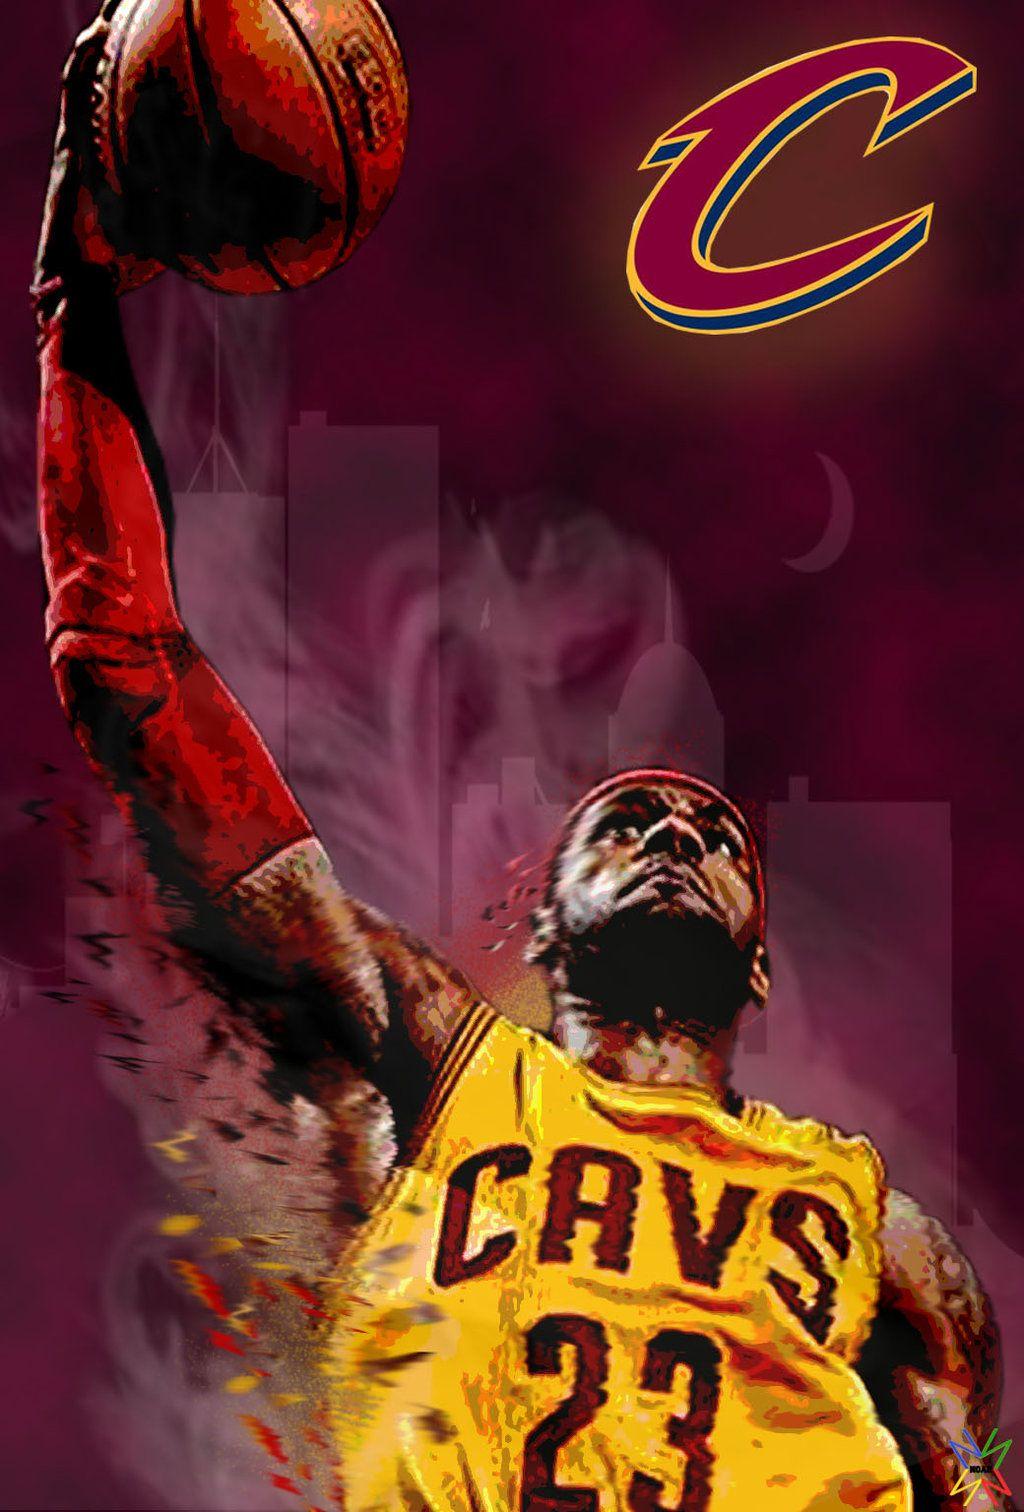 LeBron James Cavs Wallpapers - Top Free